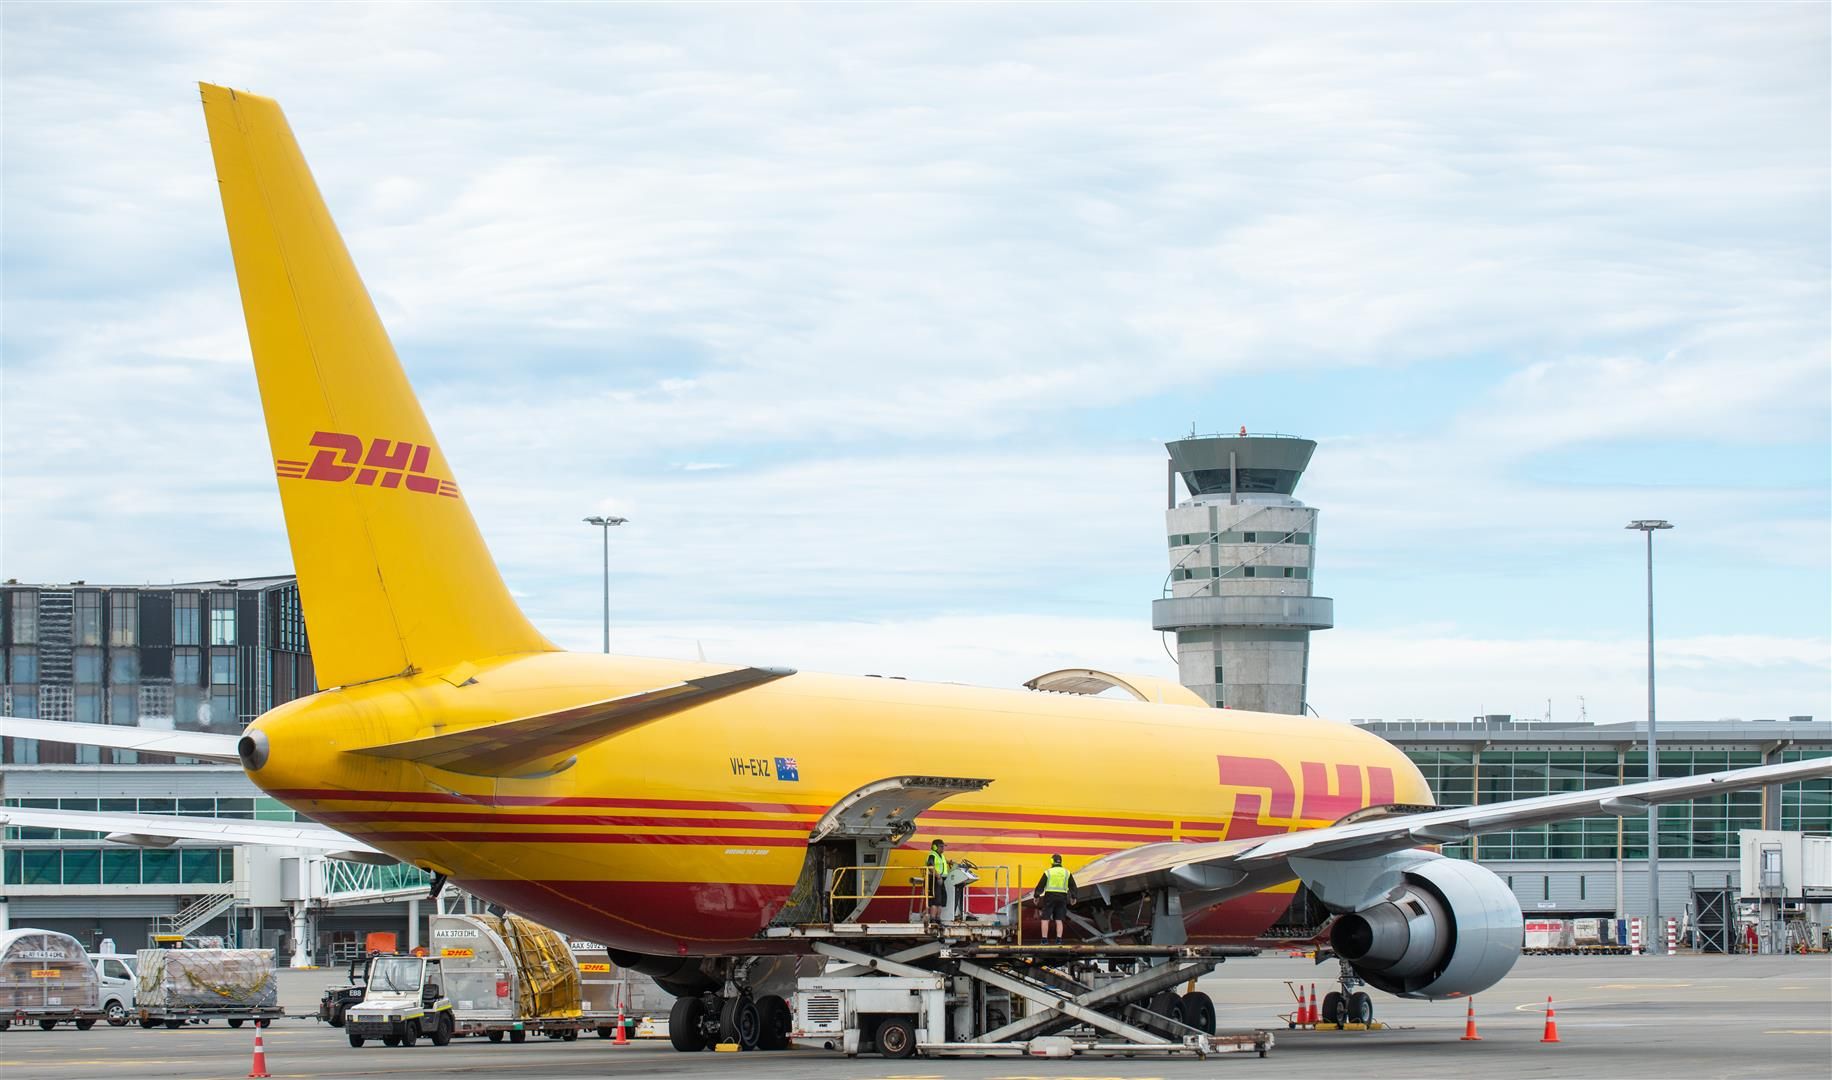 DHL have also frequented Christchurch this week